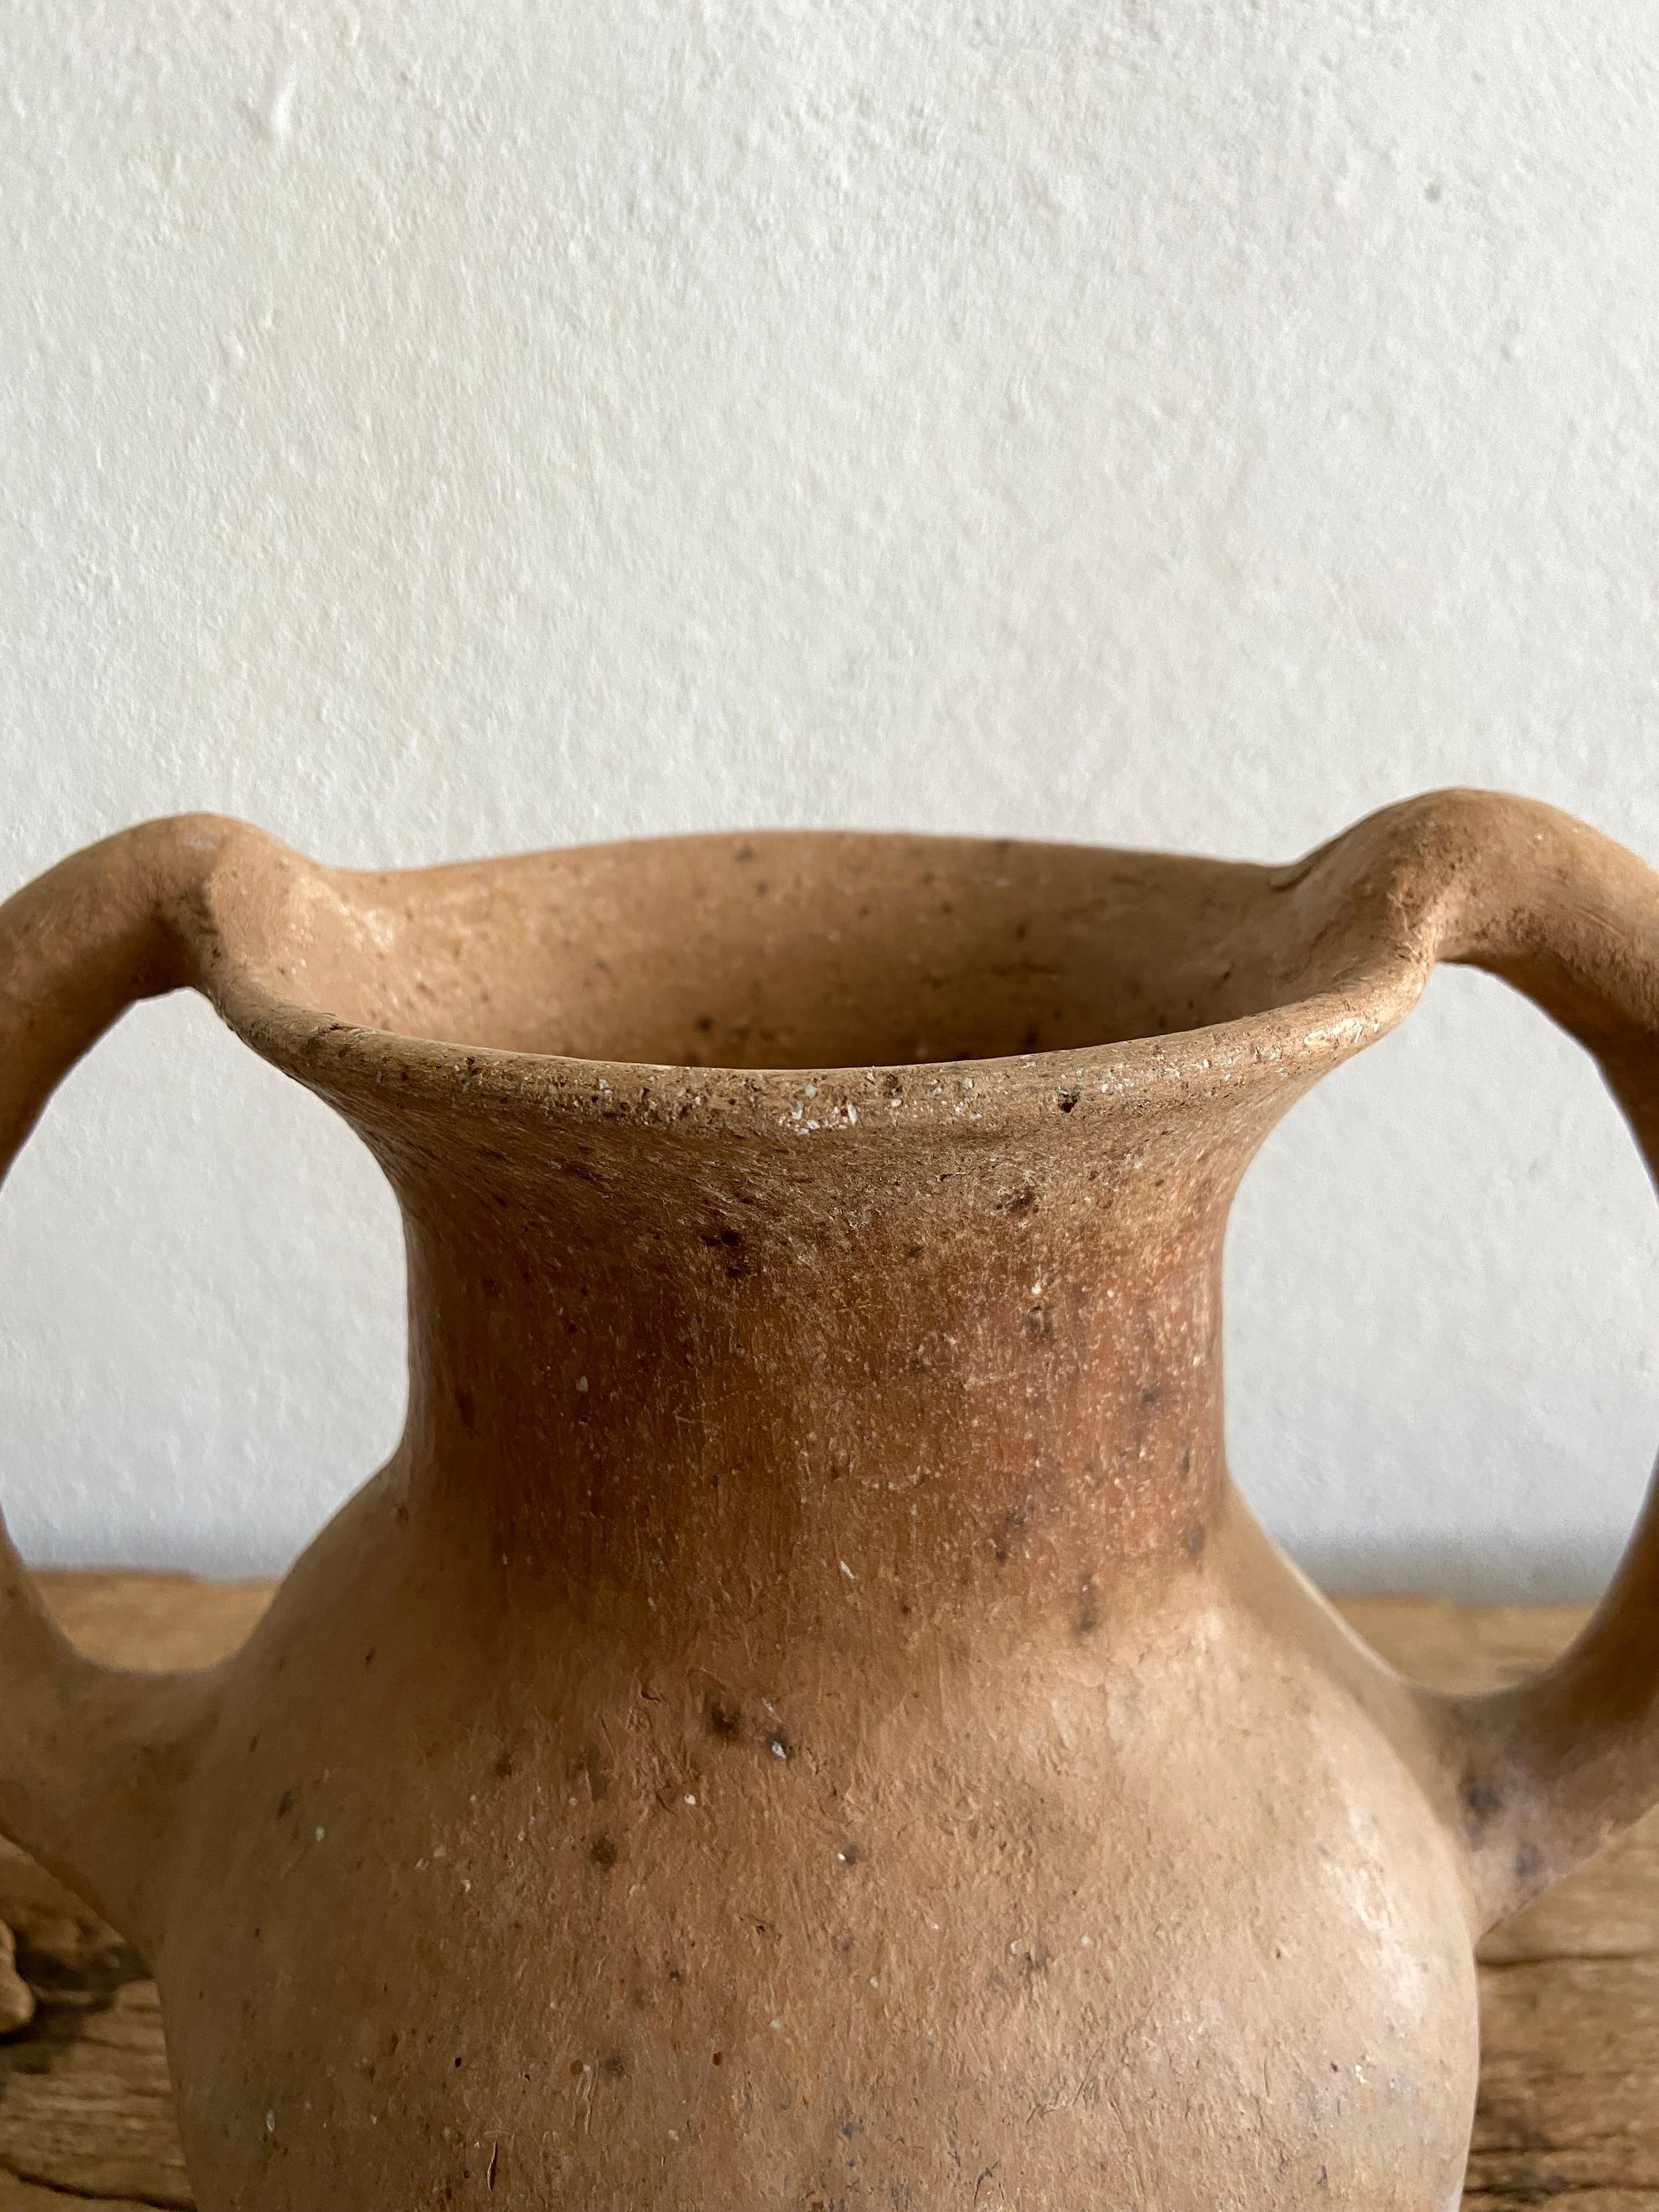 Terracotta water vessel with a double handles from the northern Sierra of Puebla, circa mid 20th century. This vessel was primarily used as a ladle before the introduction of plastics to scoop up water from a larger pot. Plastics didn't reach the